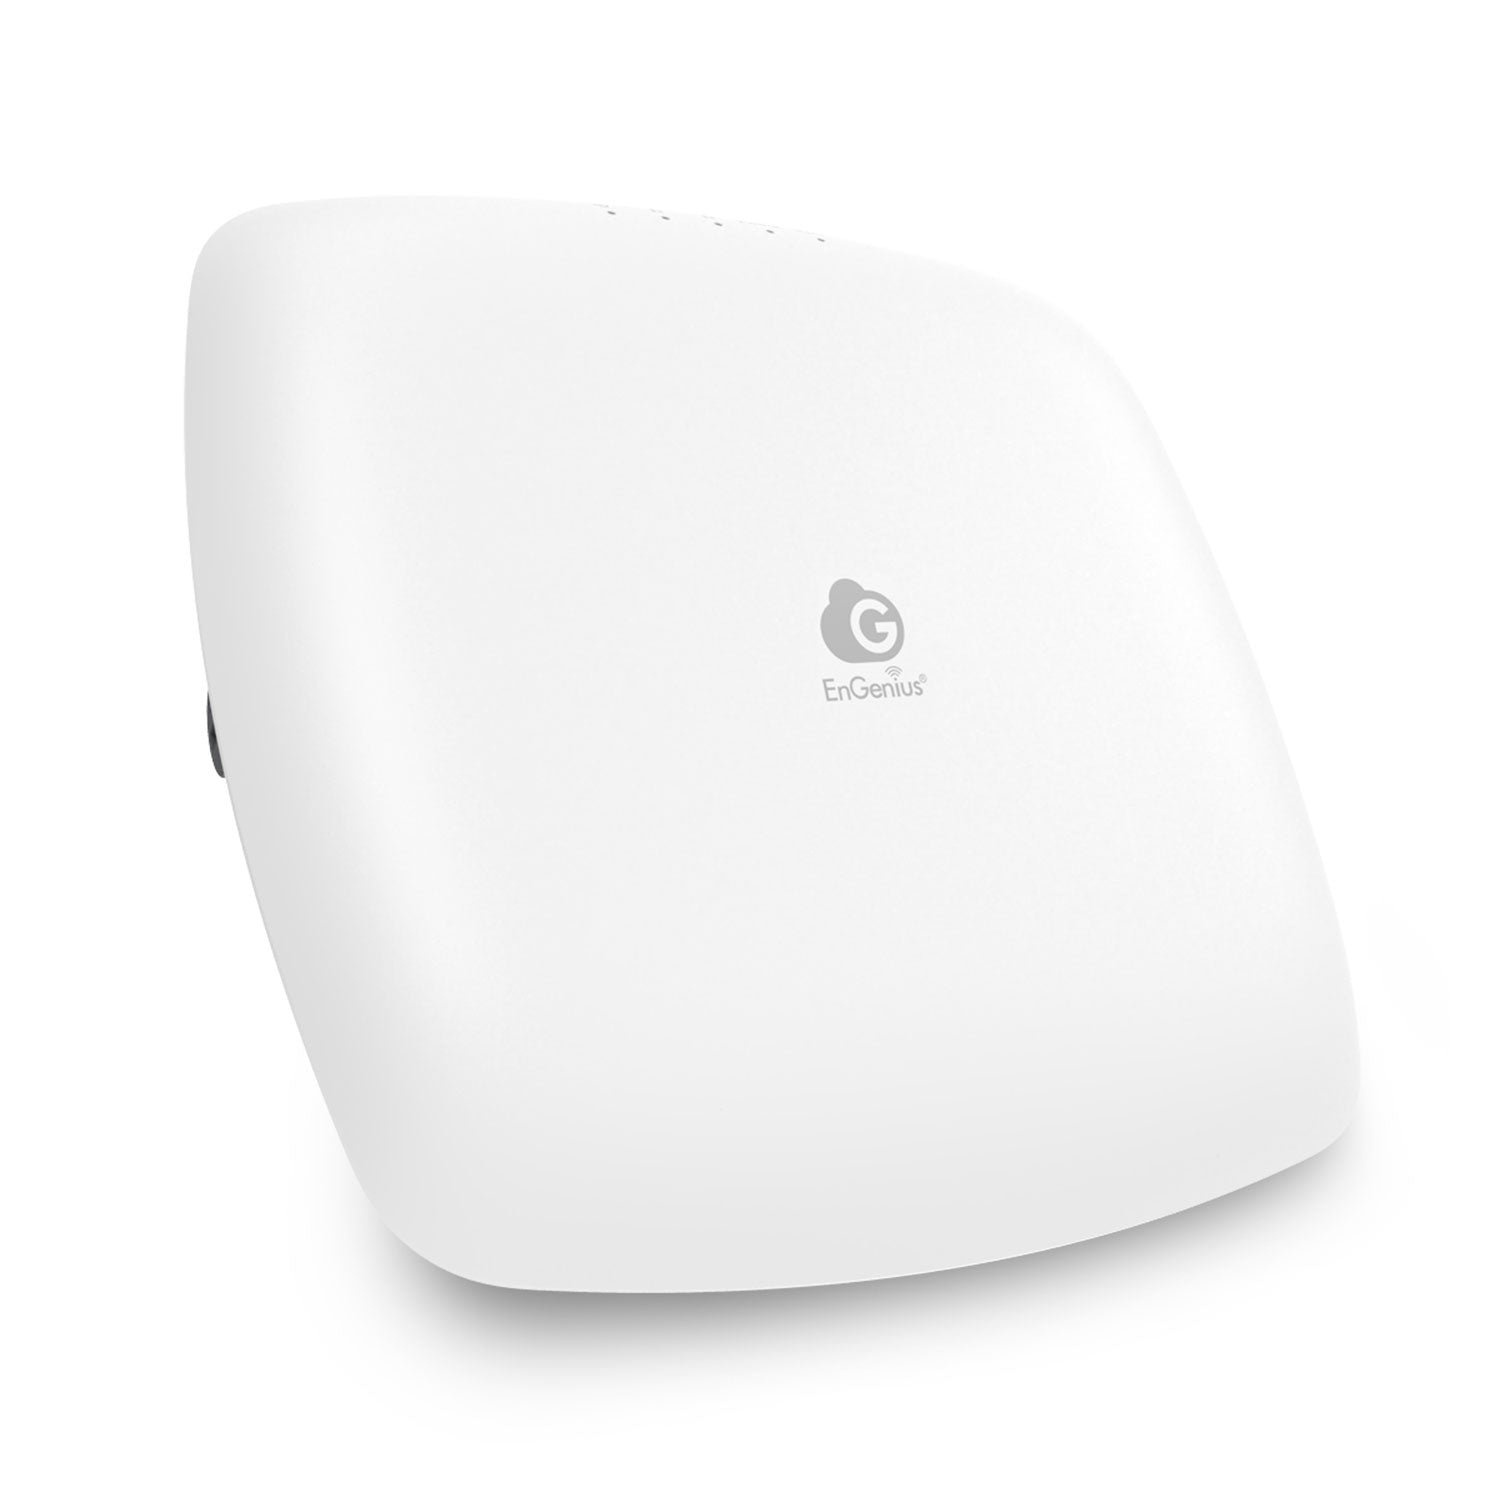 ECW130: Cloud Managed WiFi 5 11ac Wave 2 4×4 Indoor Access Point